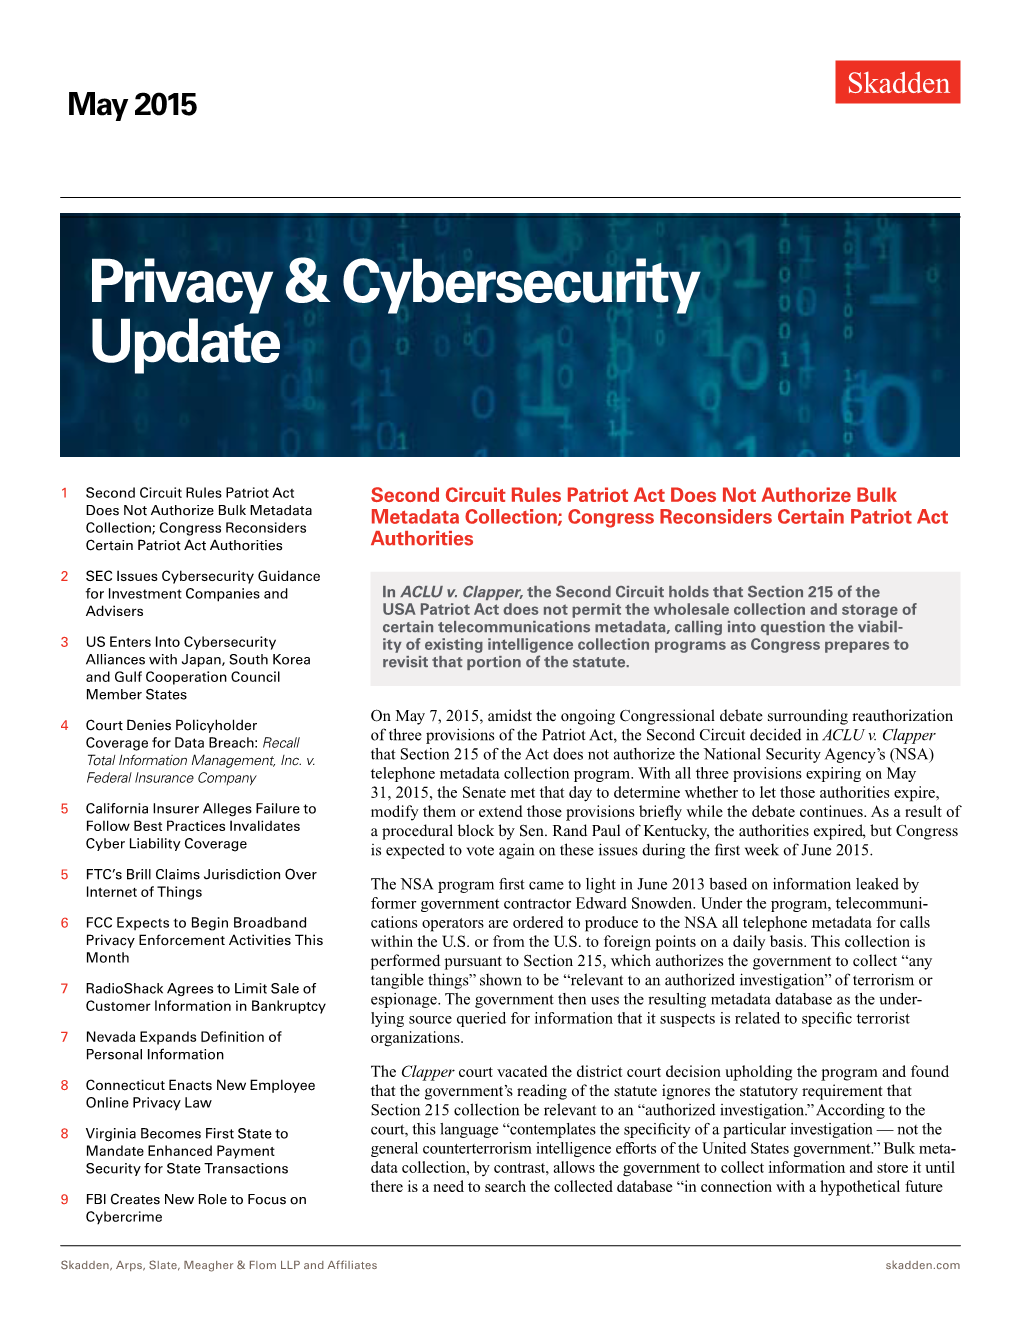 Privacy & Cybersecurity Update | May 2015